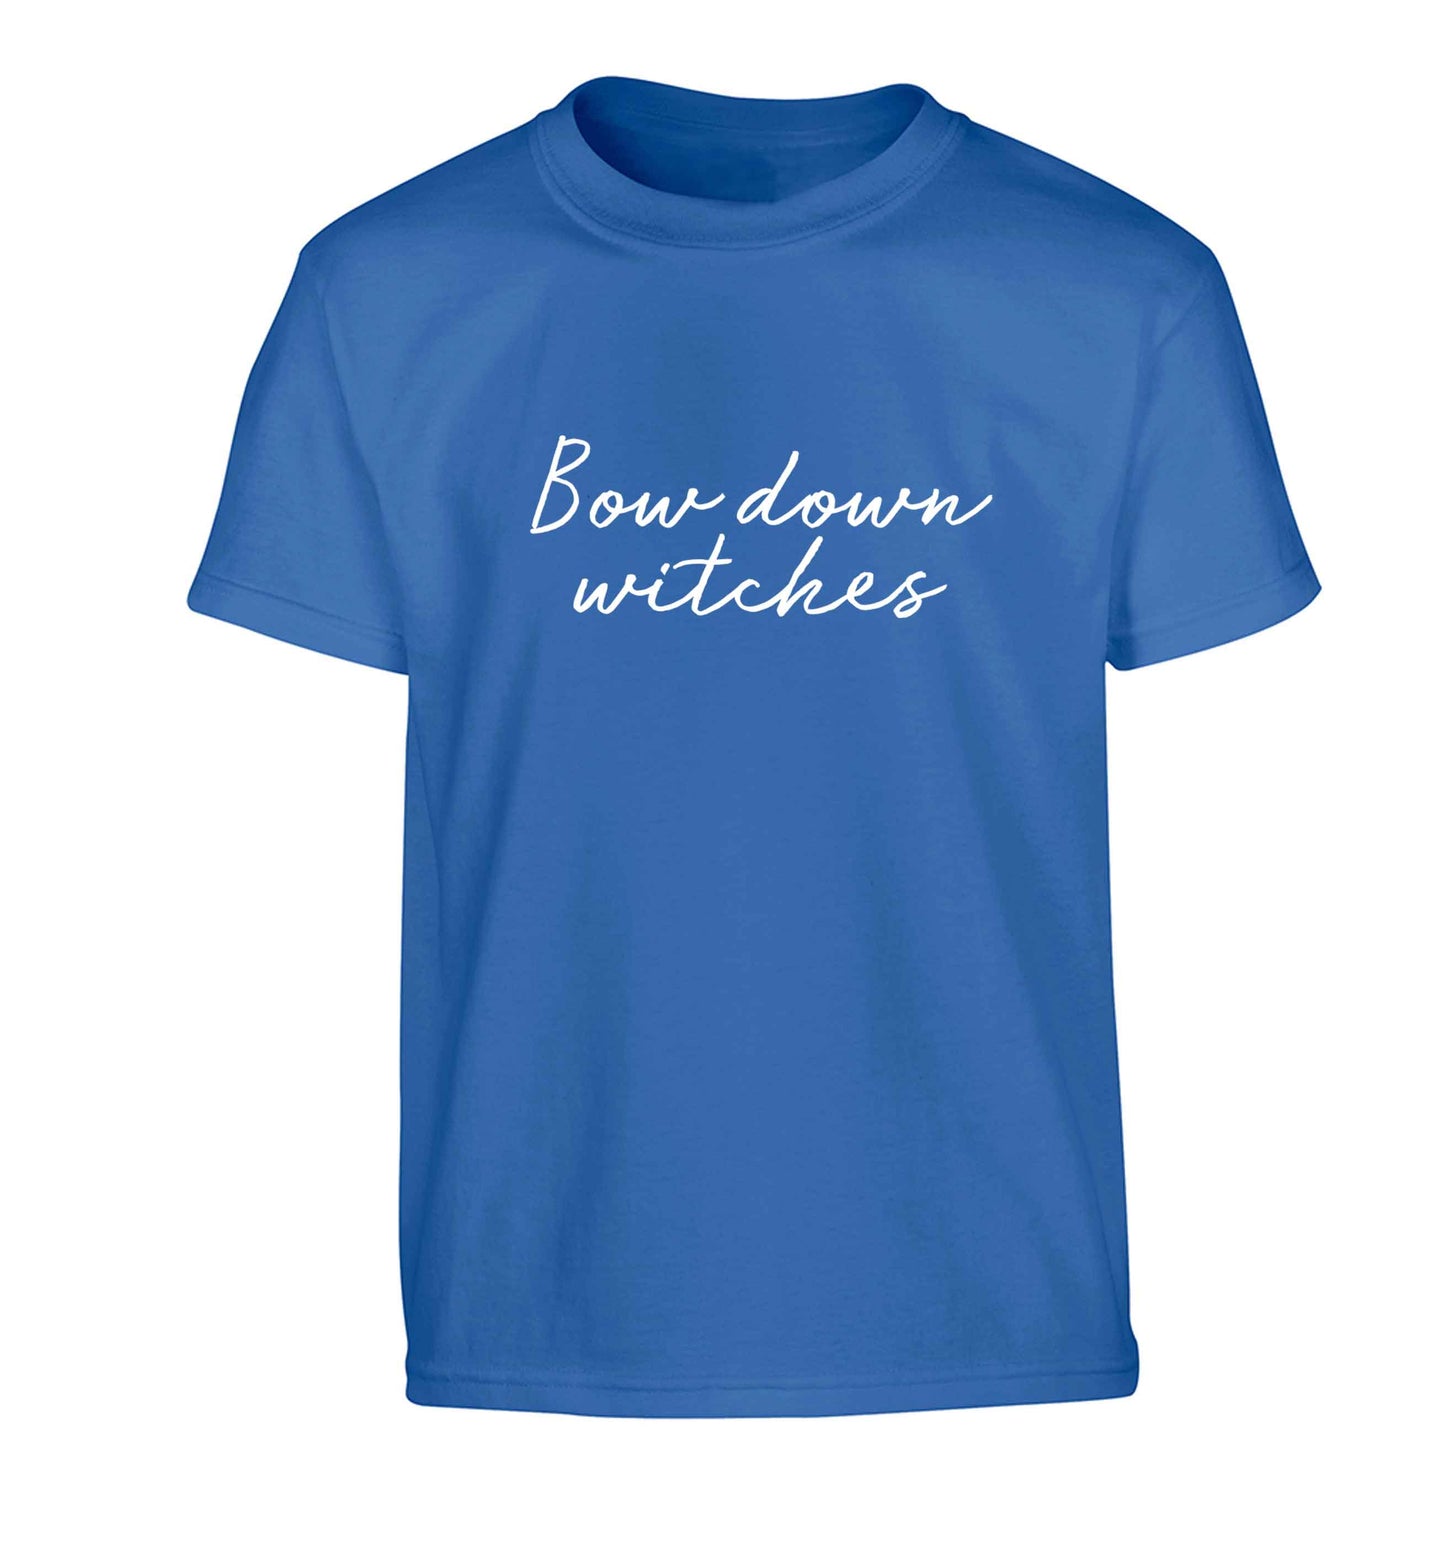 Bow down witches Children's blue Tshirt 12-13 Years